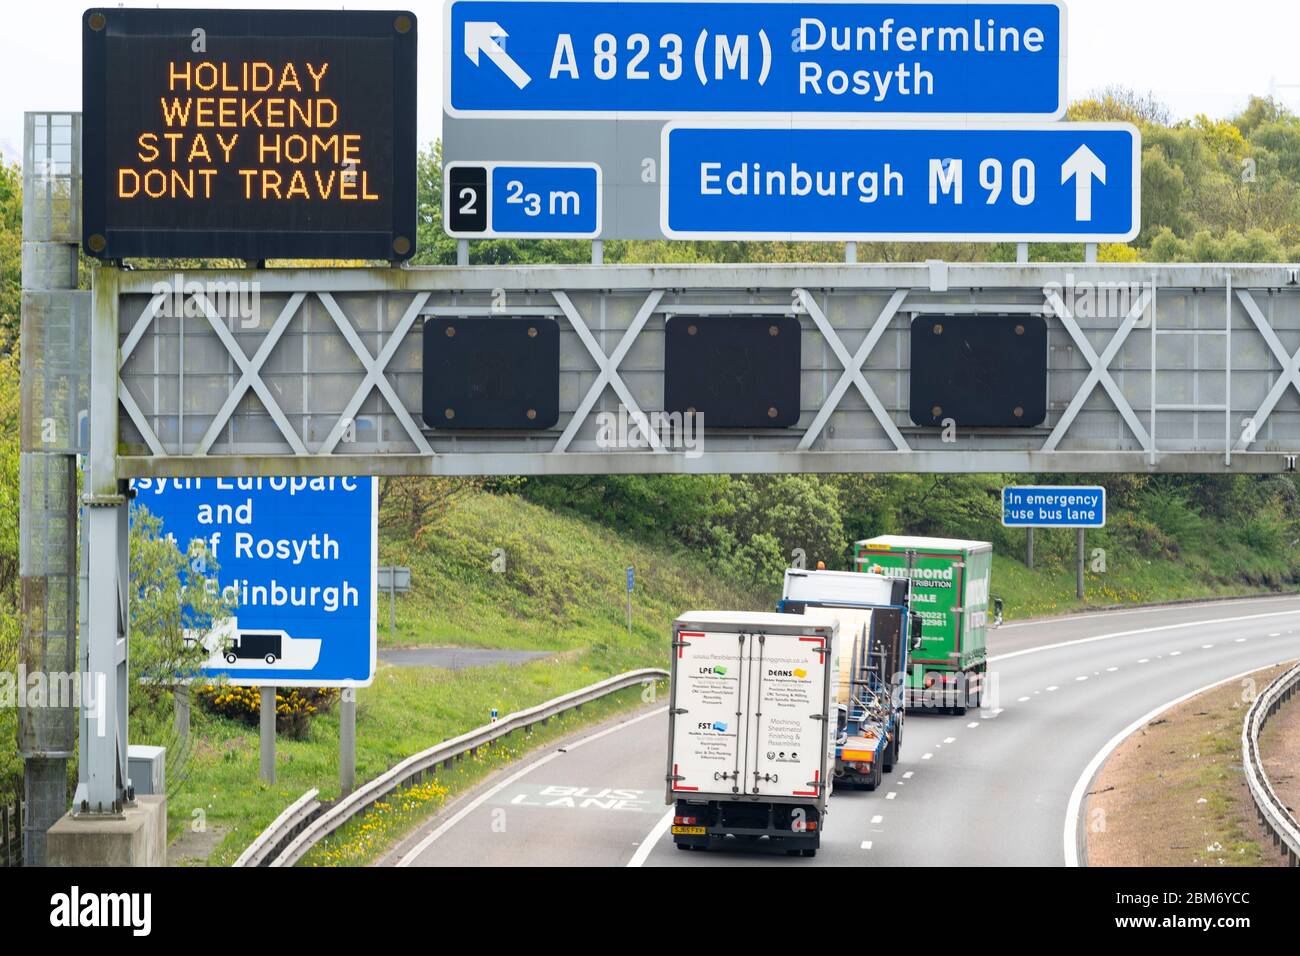 Dunfermline, Scotland, UK. 7 May 2020. Afternoon traffic on M90 in Fife noticeably heavier than normal during coronavirus lockdown. Warning sign telling motorists to stay home over holiday weekend. Iain Masterton/ Alamy Live News. Stock Photo